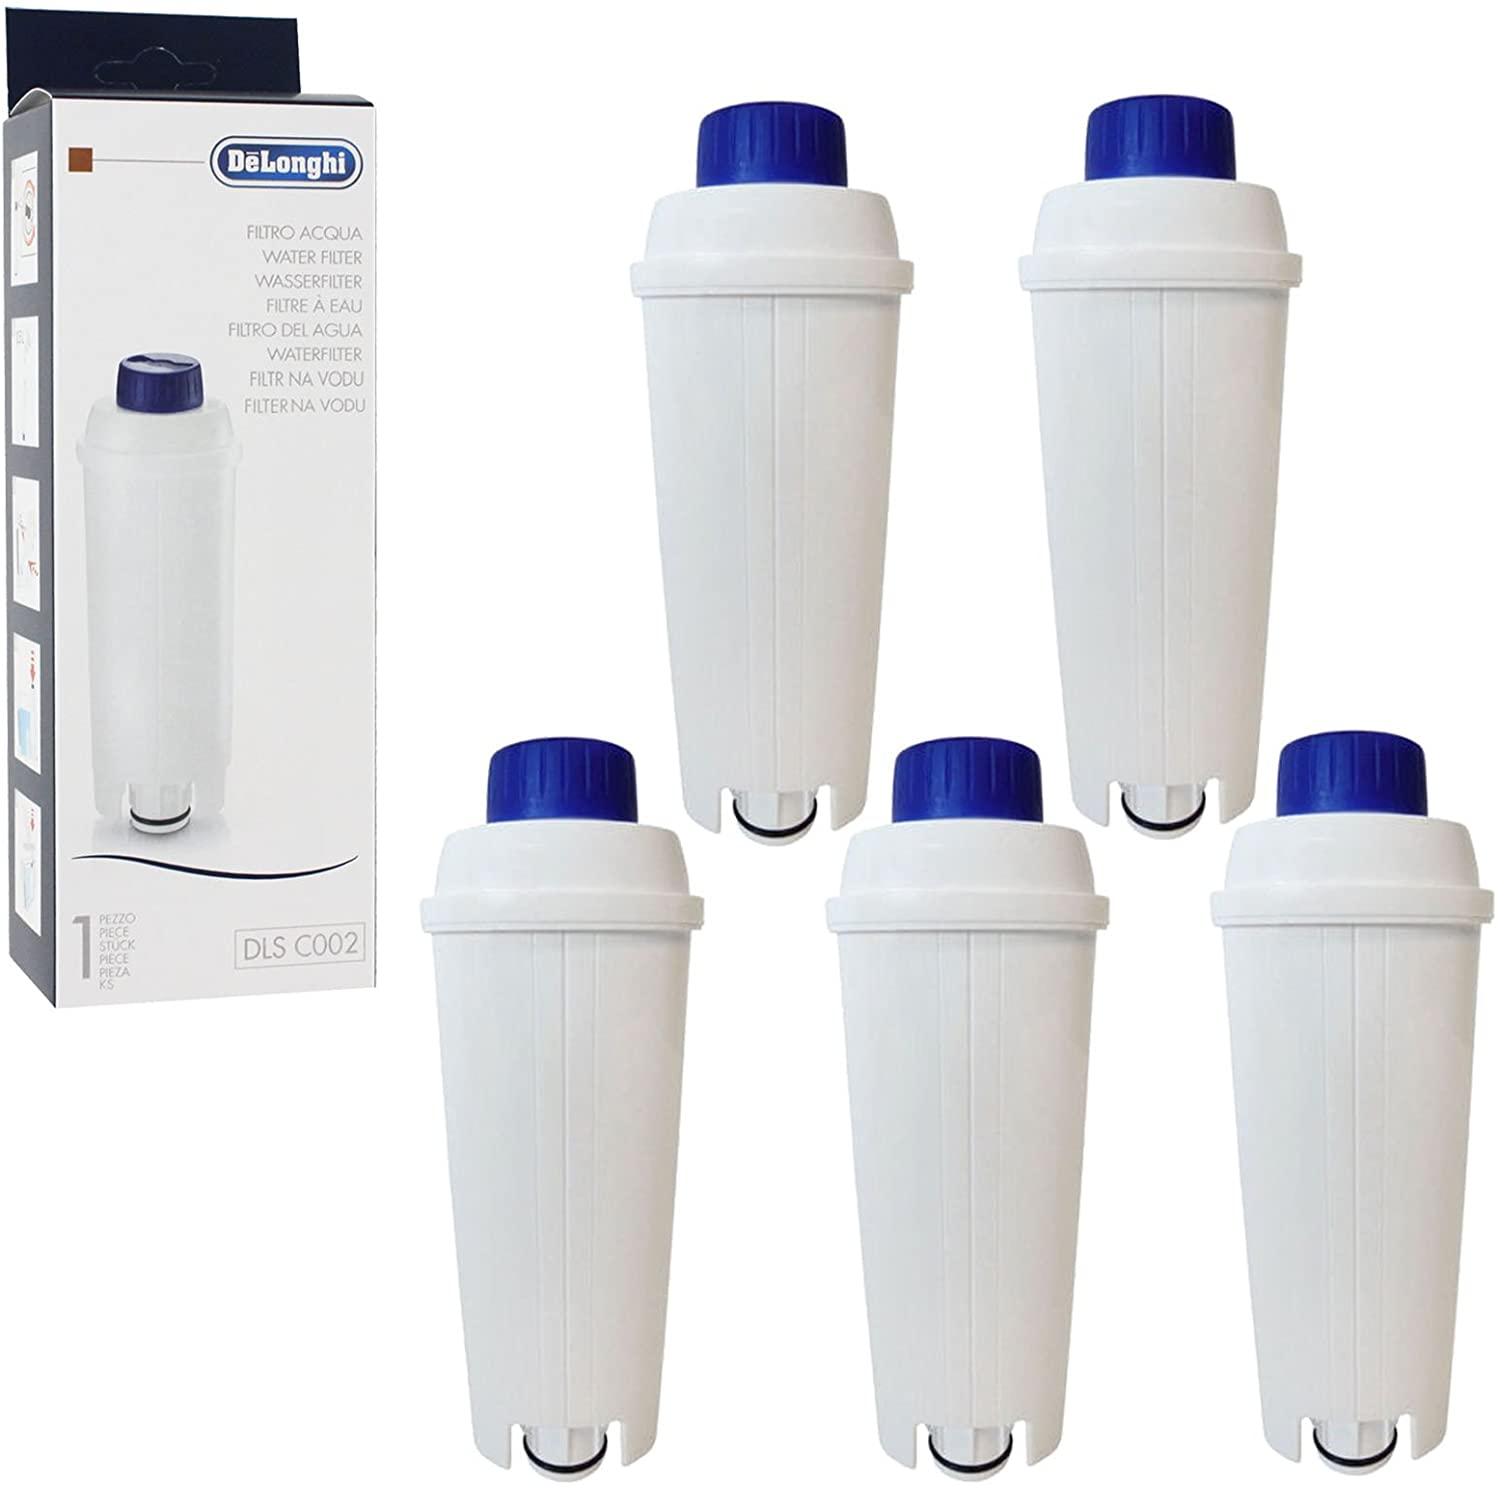 Delonghi Espresso and Bean to Cup Coffee Machine Water Filter Cartridges (Fits ECAM Series, SER3017) by De\'Longhi